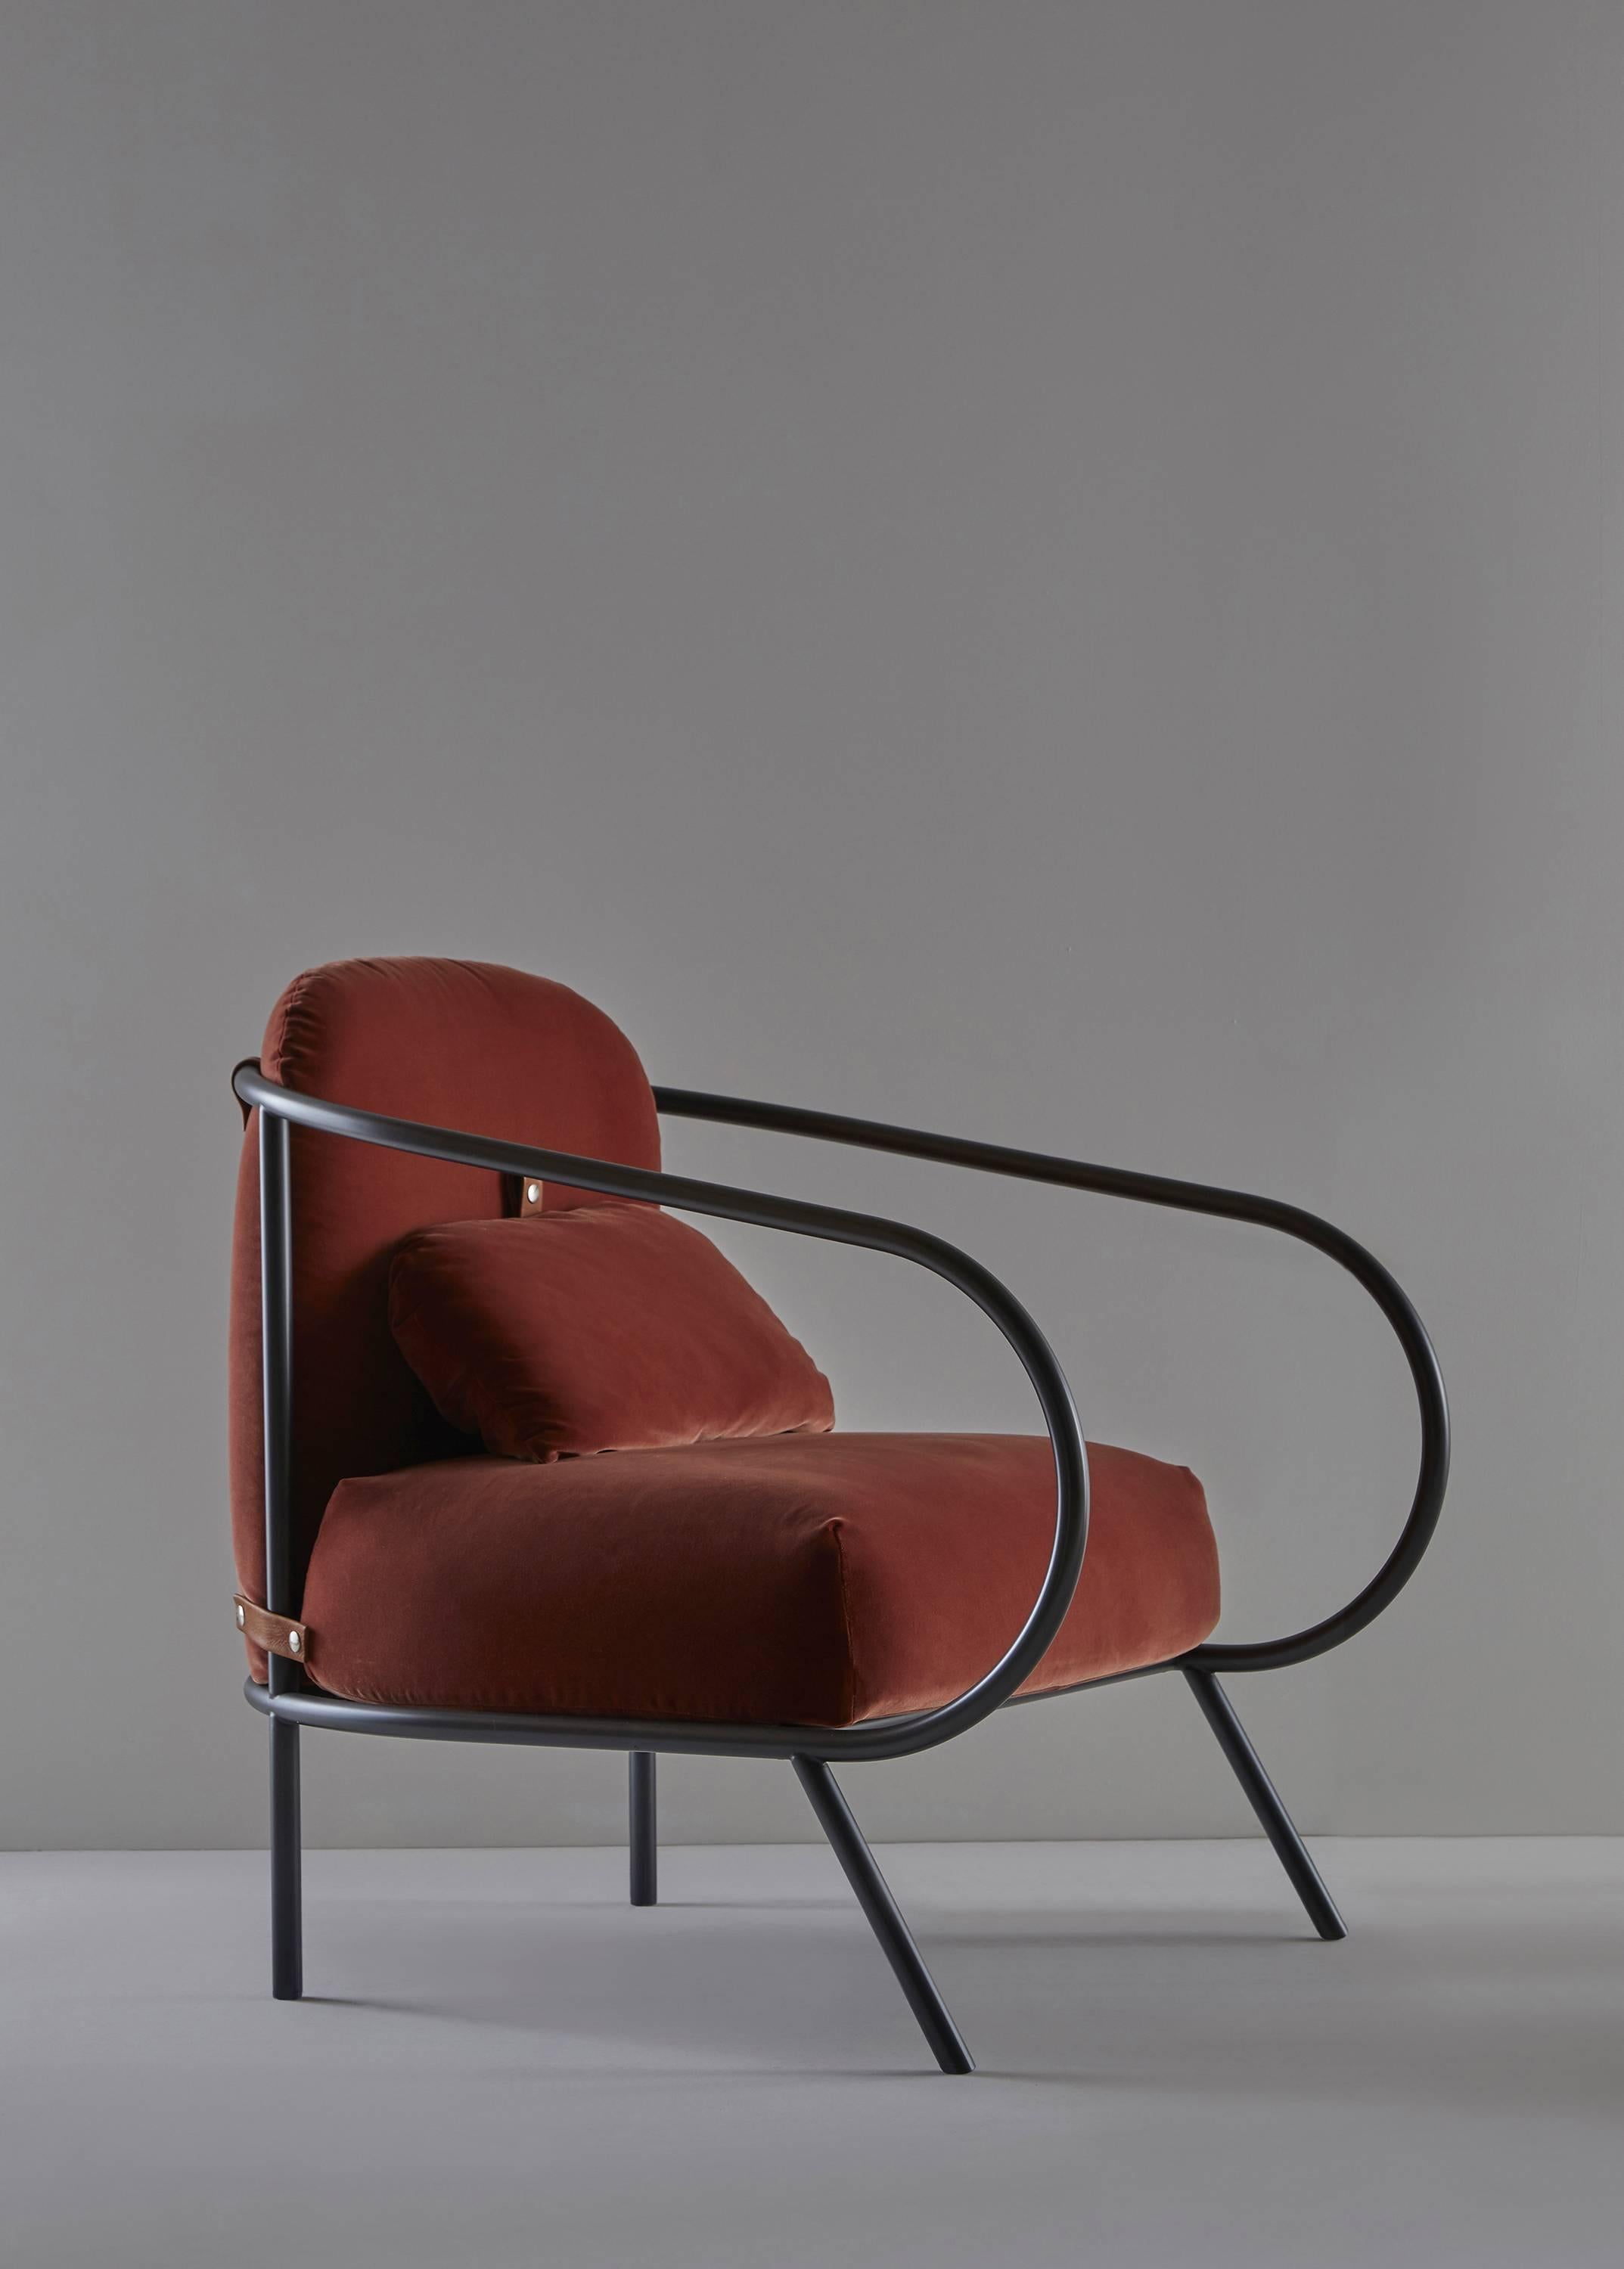 Minima armchair in red by Denis Guidone for Mingardo is the first armchair in the Mingardo catalog and is the first time that the company has released a padded chair. The armchair rests on the ground through the unique added elements that stronger